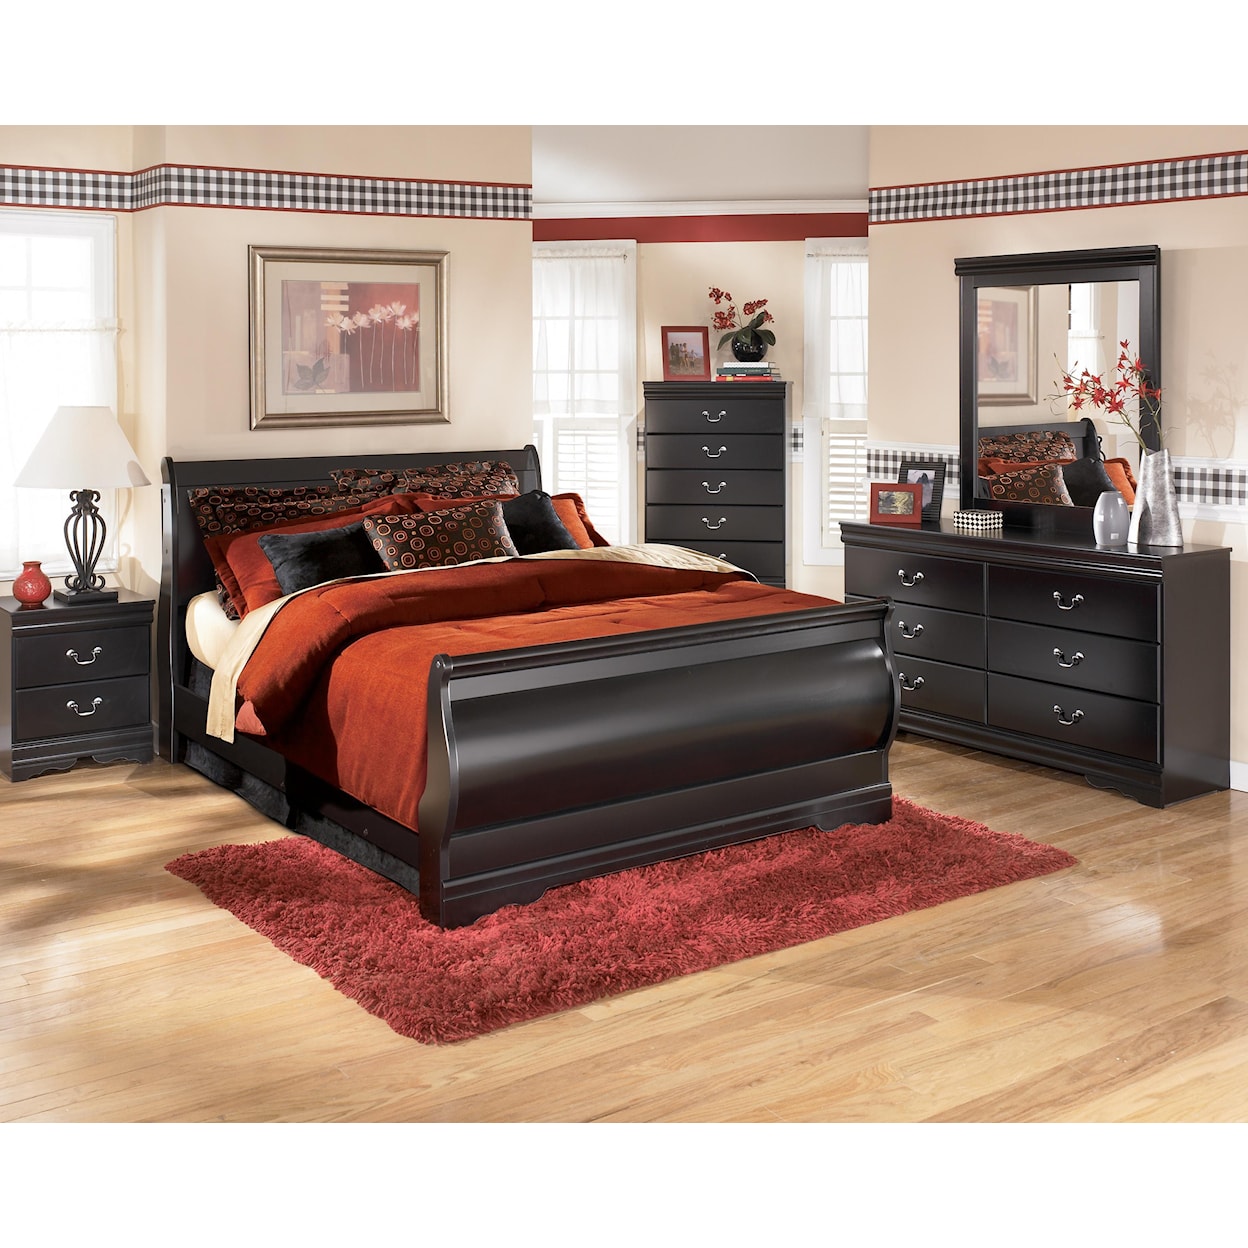 Signature Design by Ashley Furniture Huey Vineyard 4-Piece Bedroom Group